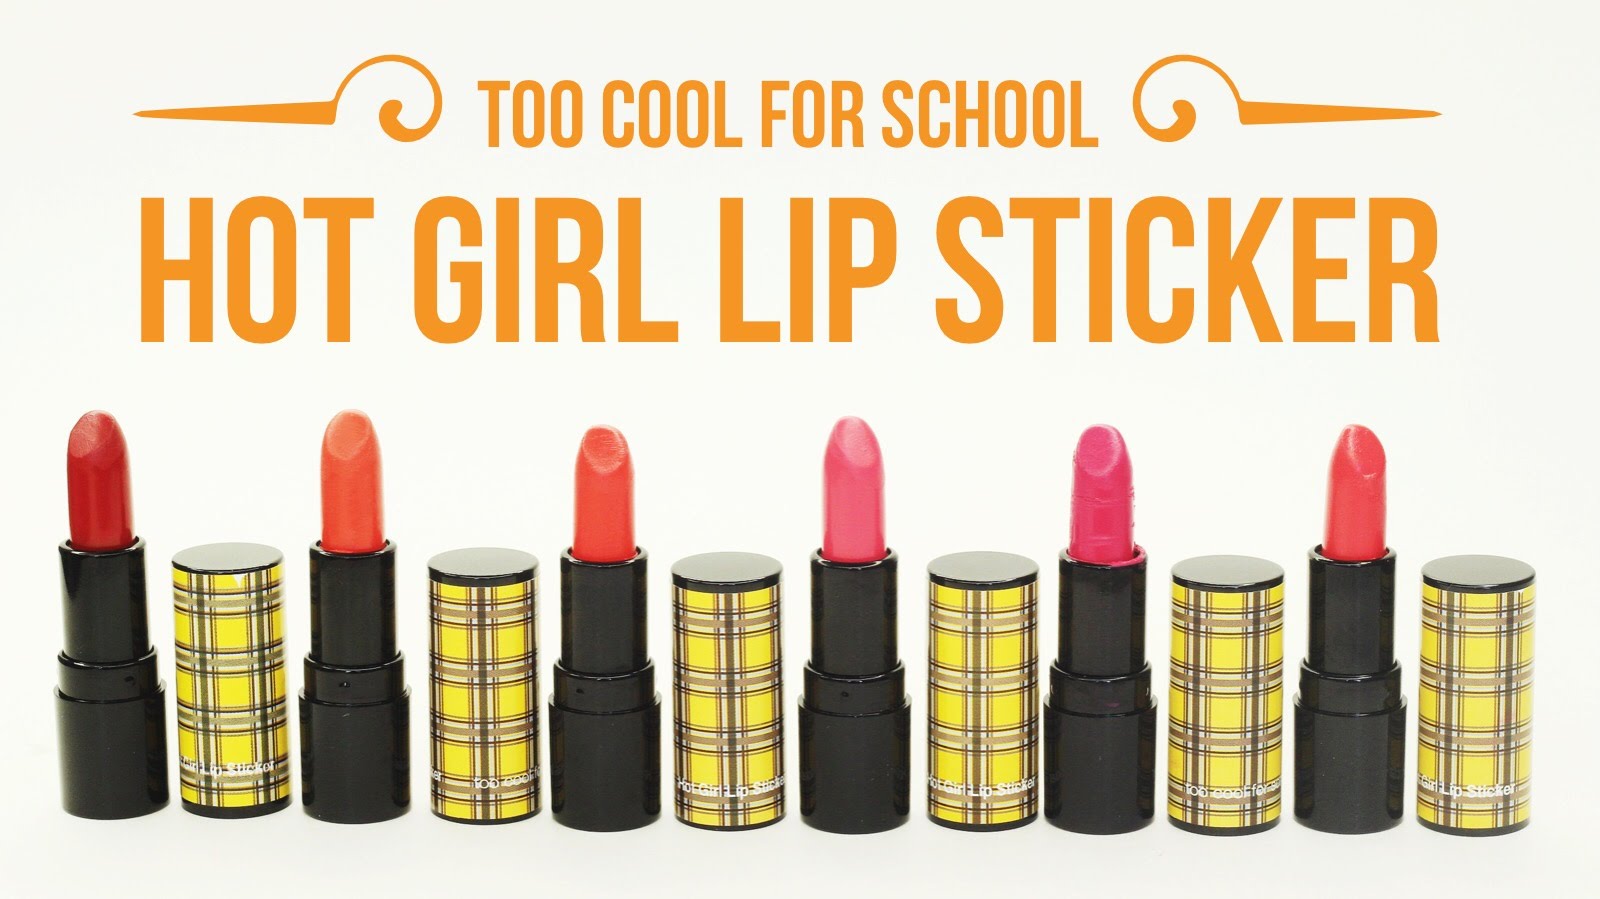 Son Too cool for school – Hot girl lip sticker  2